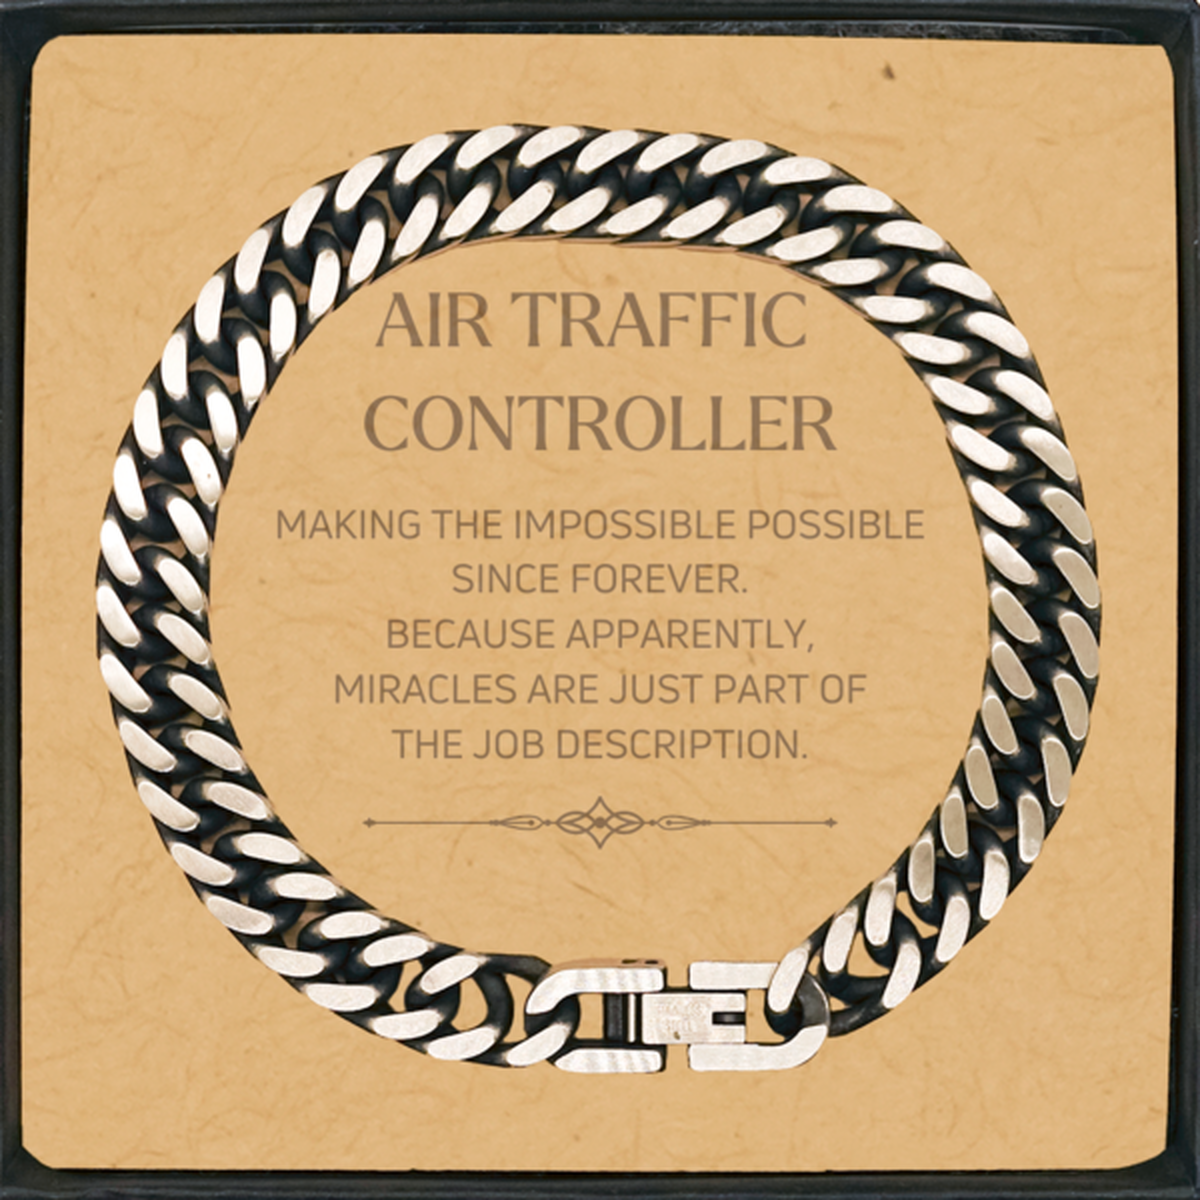 Funny Air Traffic Controller Gifts, Miracles are just part of the job description, Inspirational Birthday Cuban Link Chain Bracelet For Air Traffic Controller, Men, Women, Coworkers, Friends, Boss